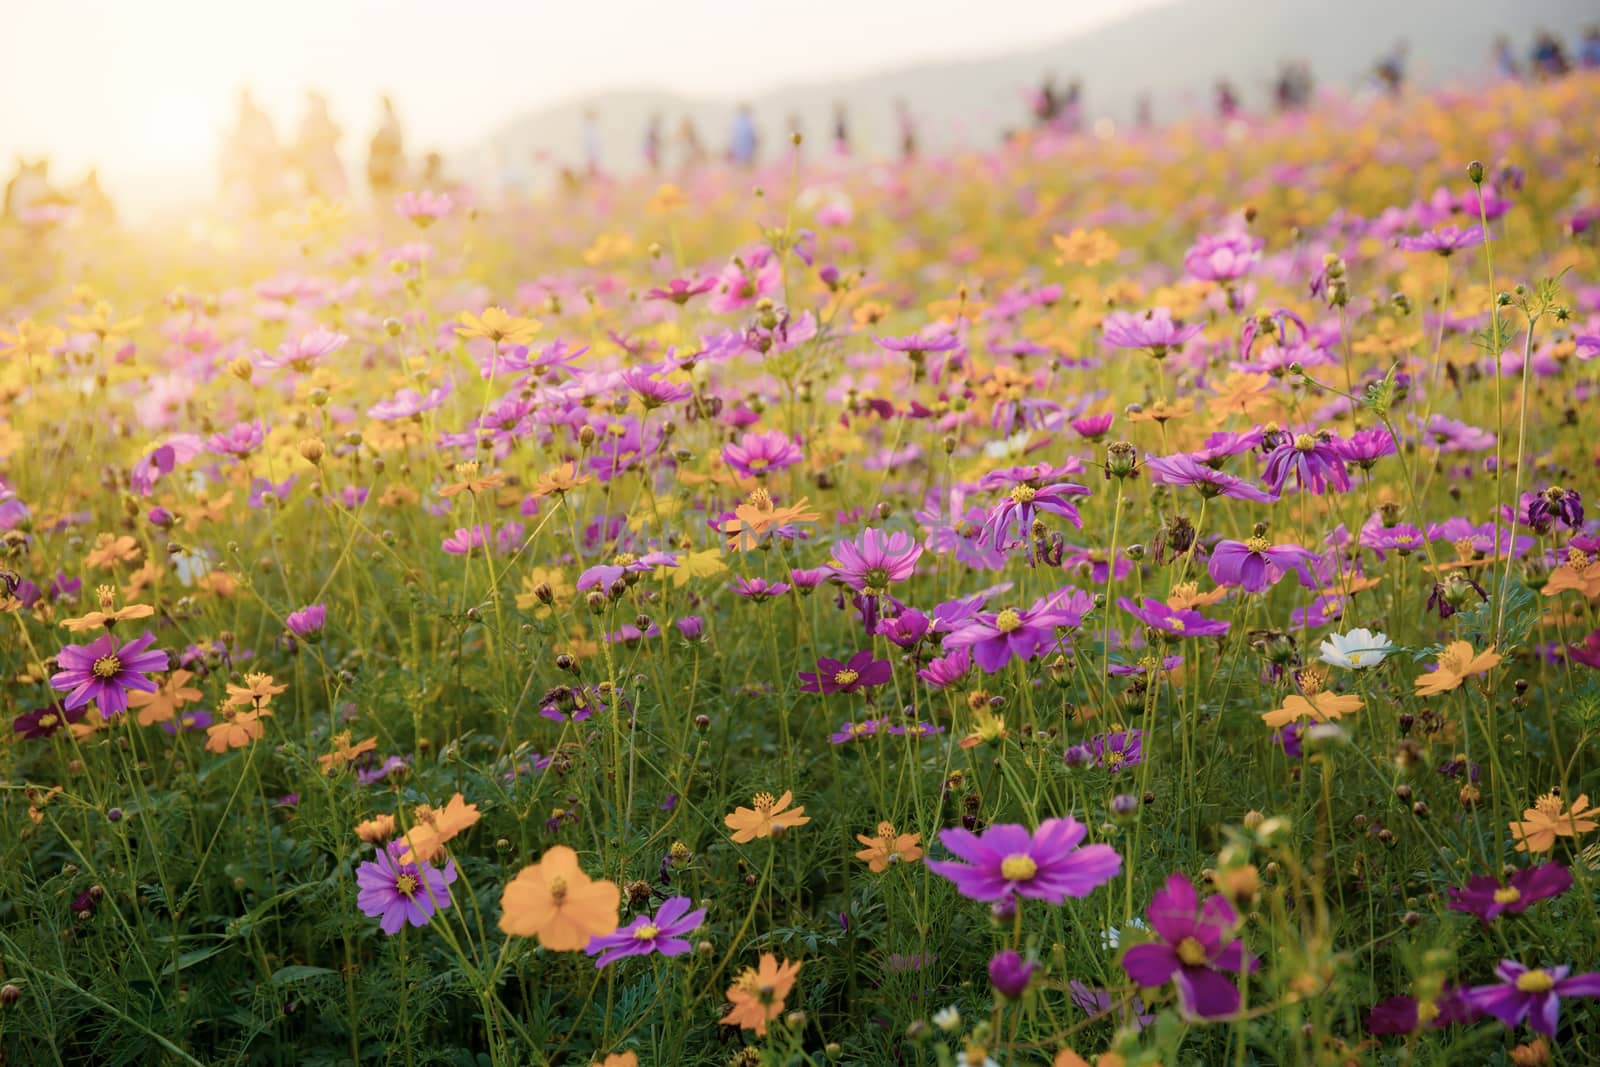 Cosmos on field with colorful at the sunlight.